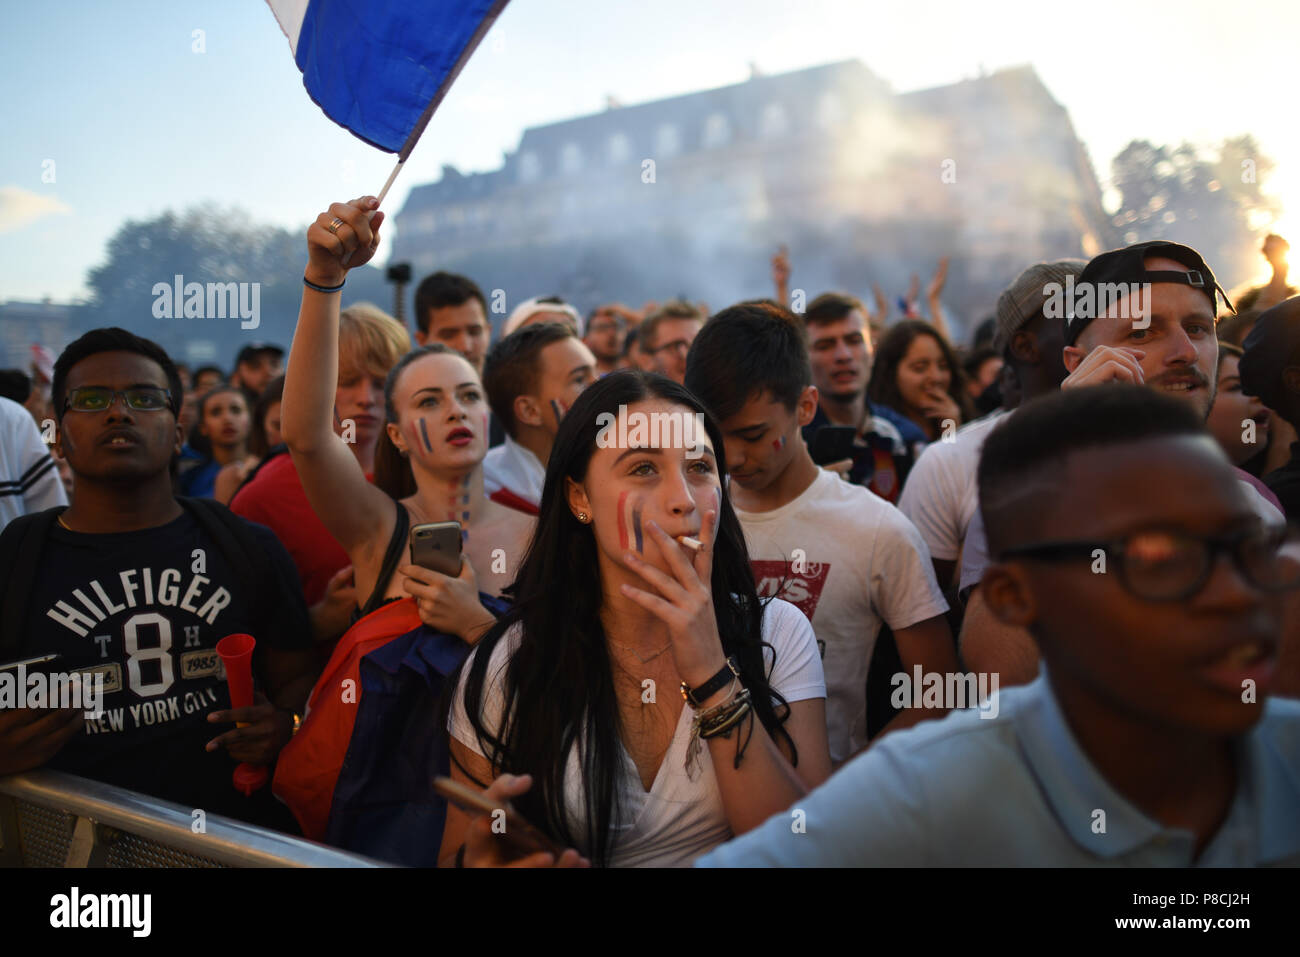 July 10, 2018 - Paris, France: Supporters of the French football team  gather at Hotel de Ville to watch the semi-final of the soccer World Cup  between France and Belgium. Des supporters